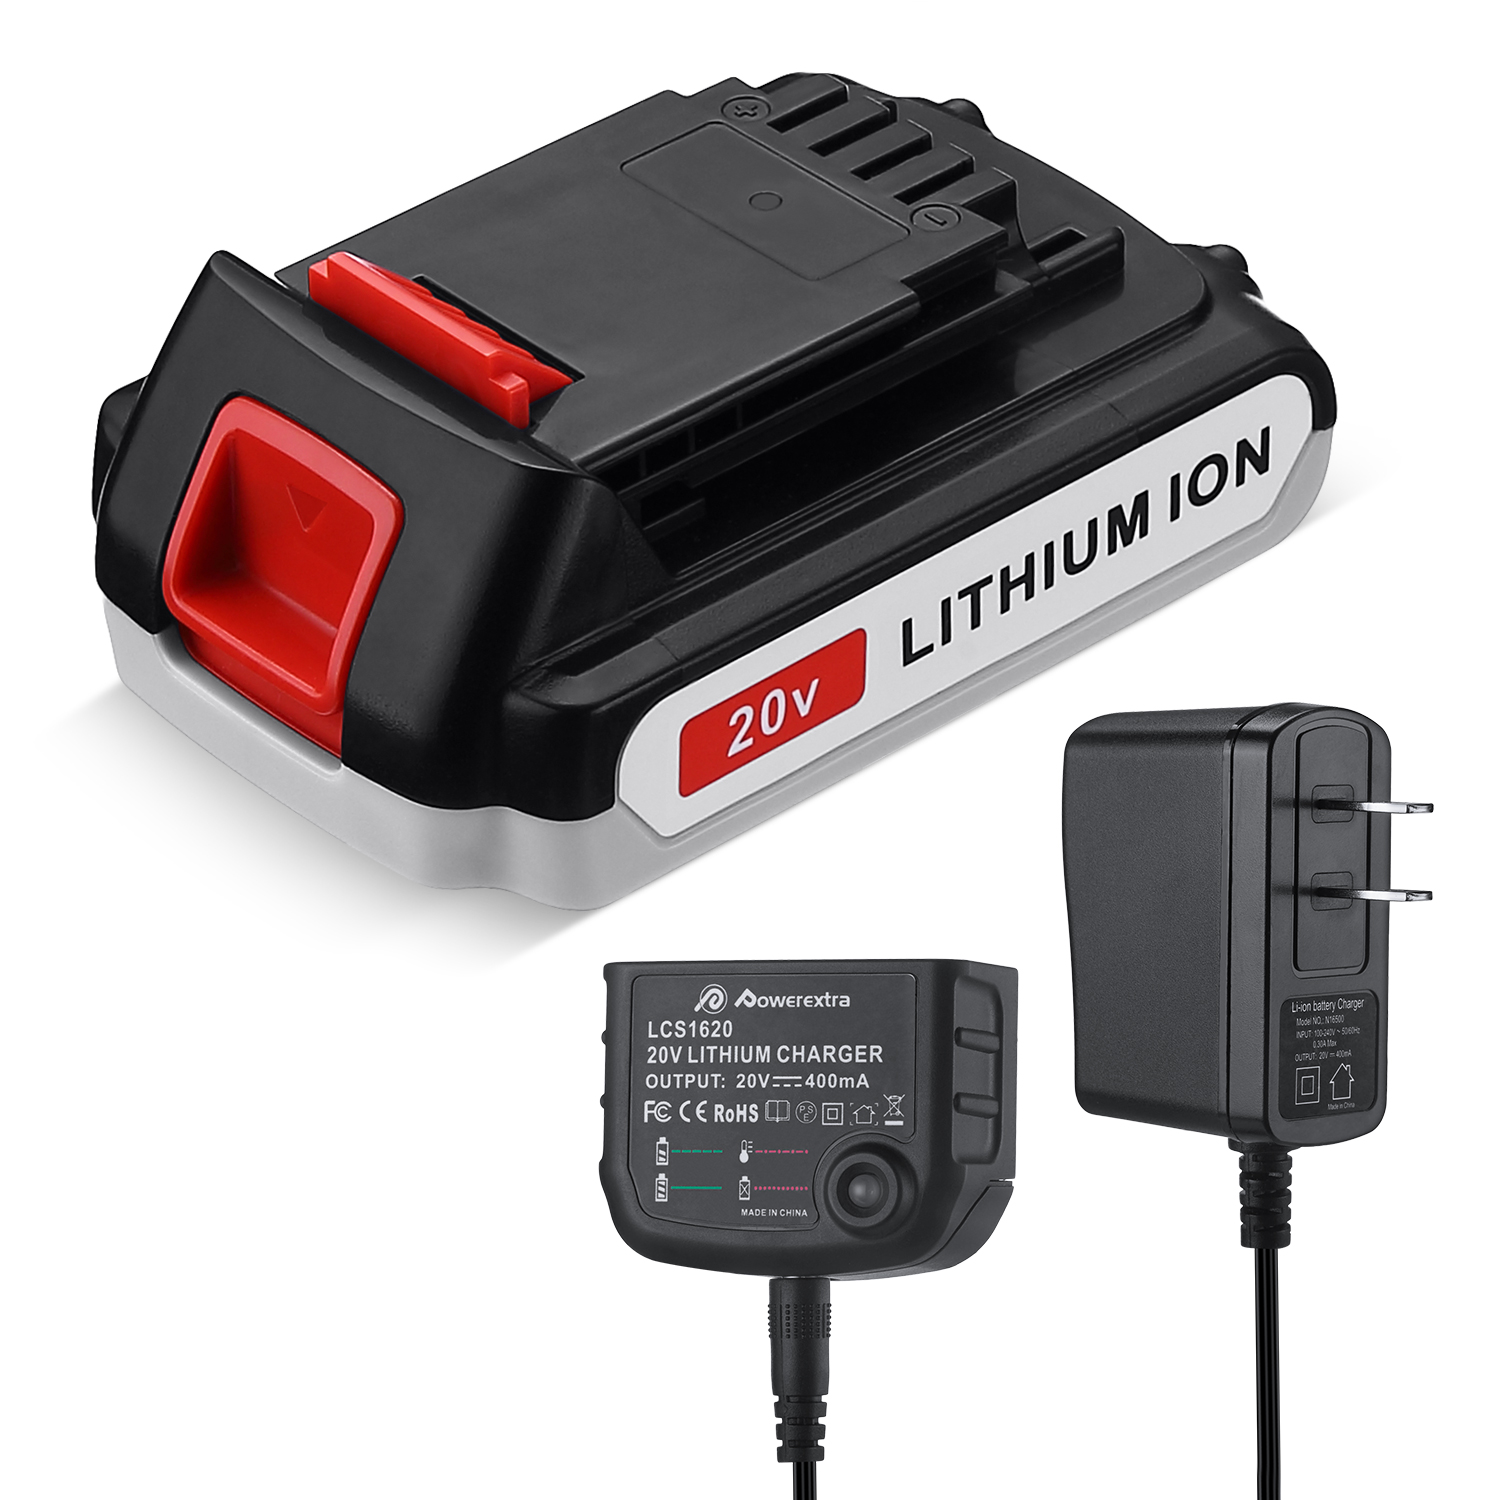  20 Volt LithiumIon Battery Charger LCS1620 for Black